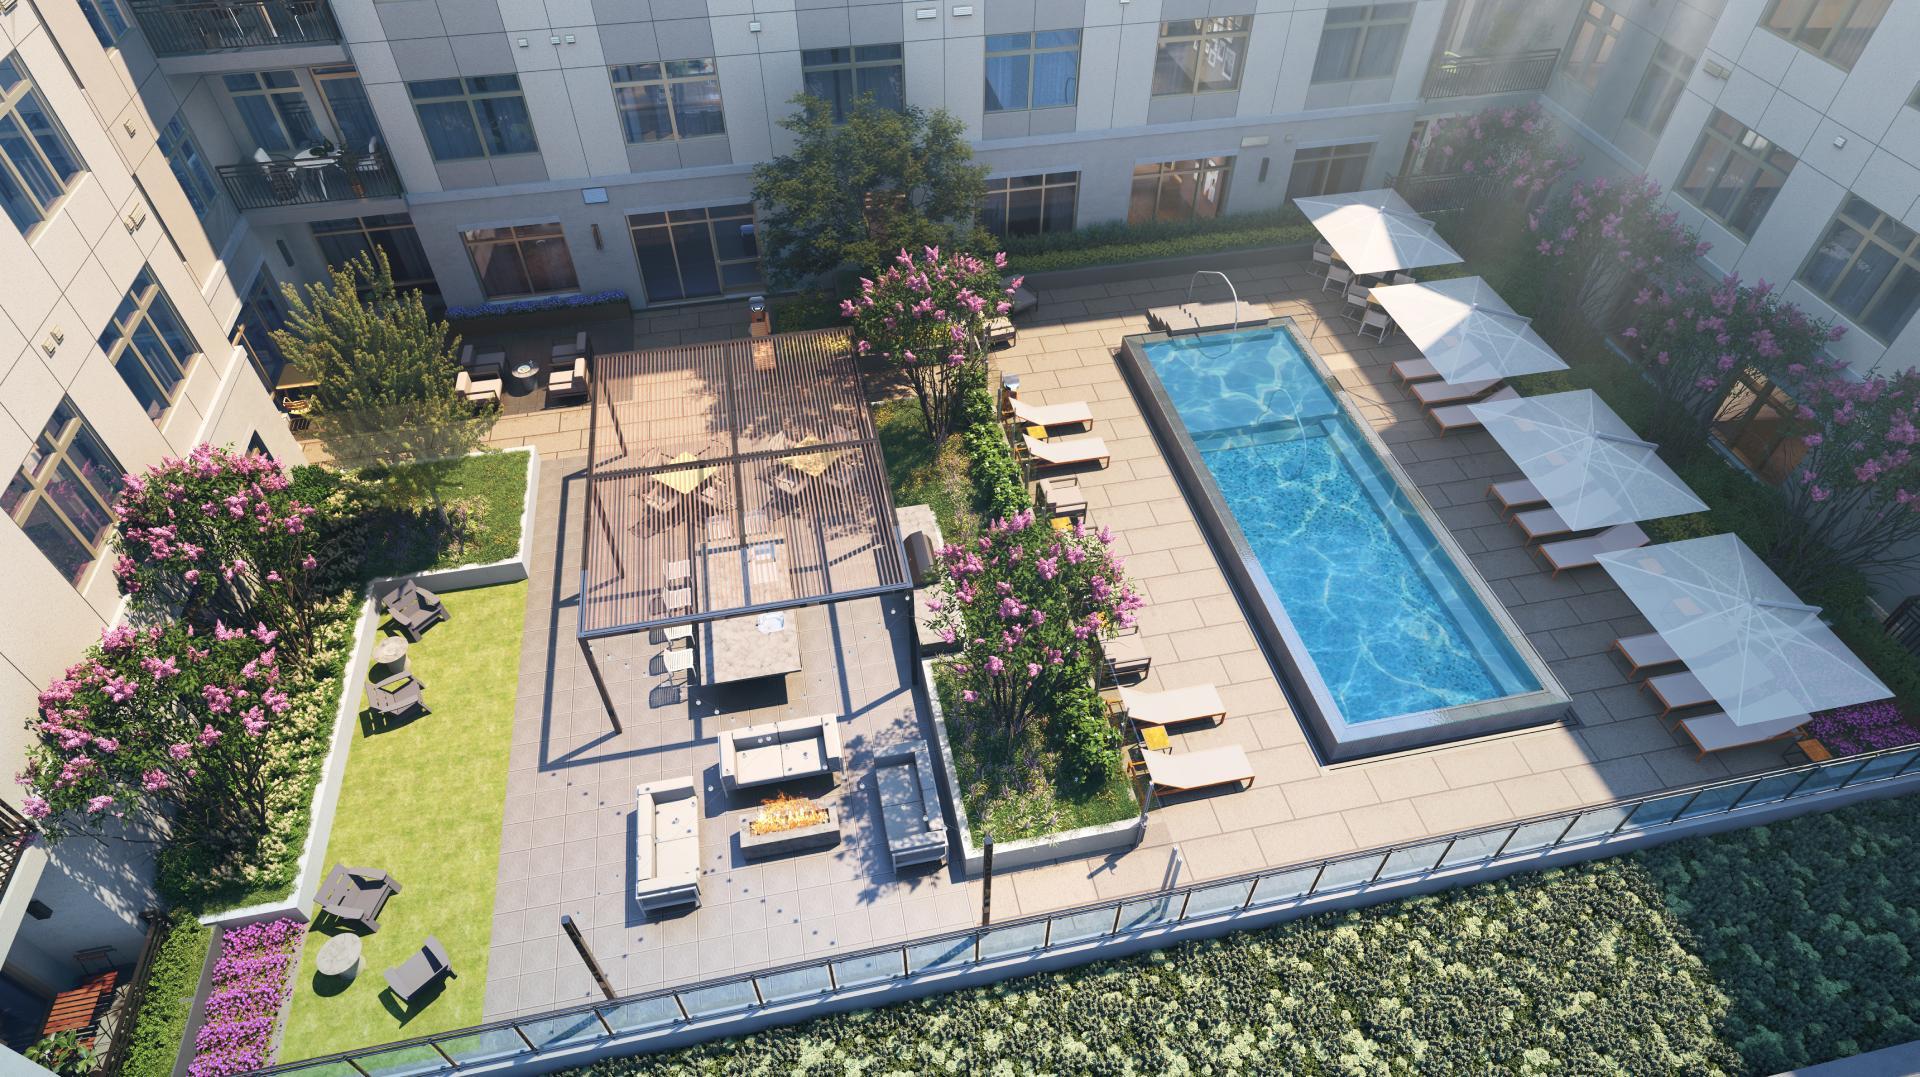 A rendering of the active courtyard at Coulter Place, with pool and lounge areas